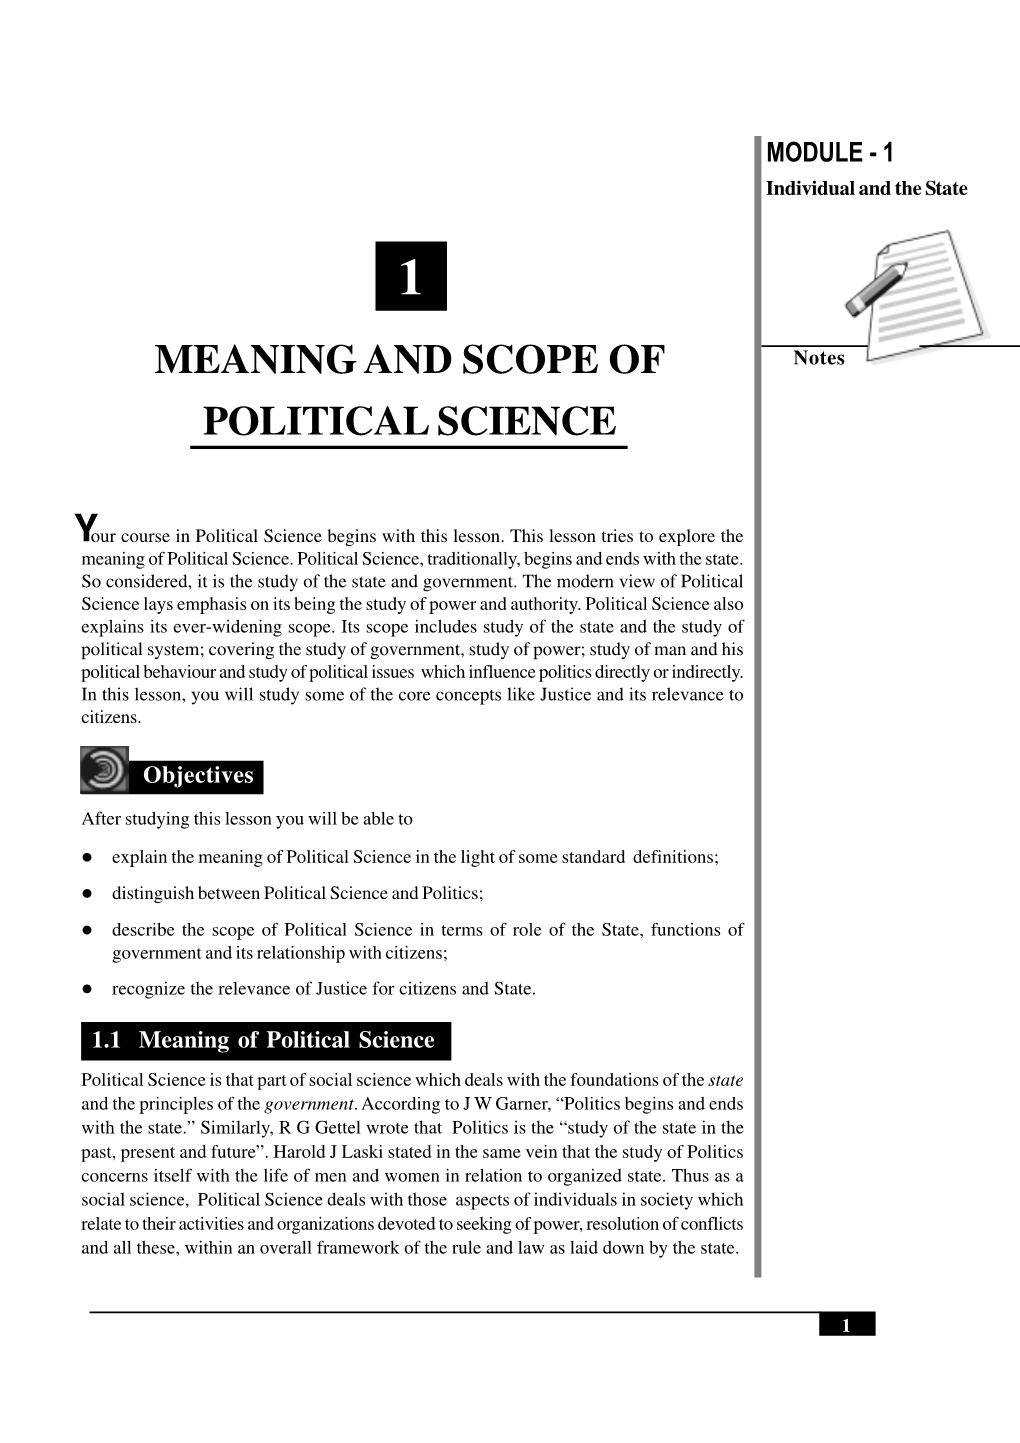 Meaning and Scope of Political Science MODULE - 1 Individual and the State